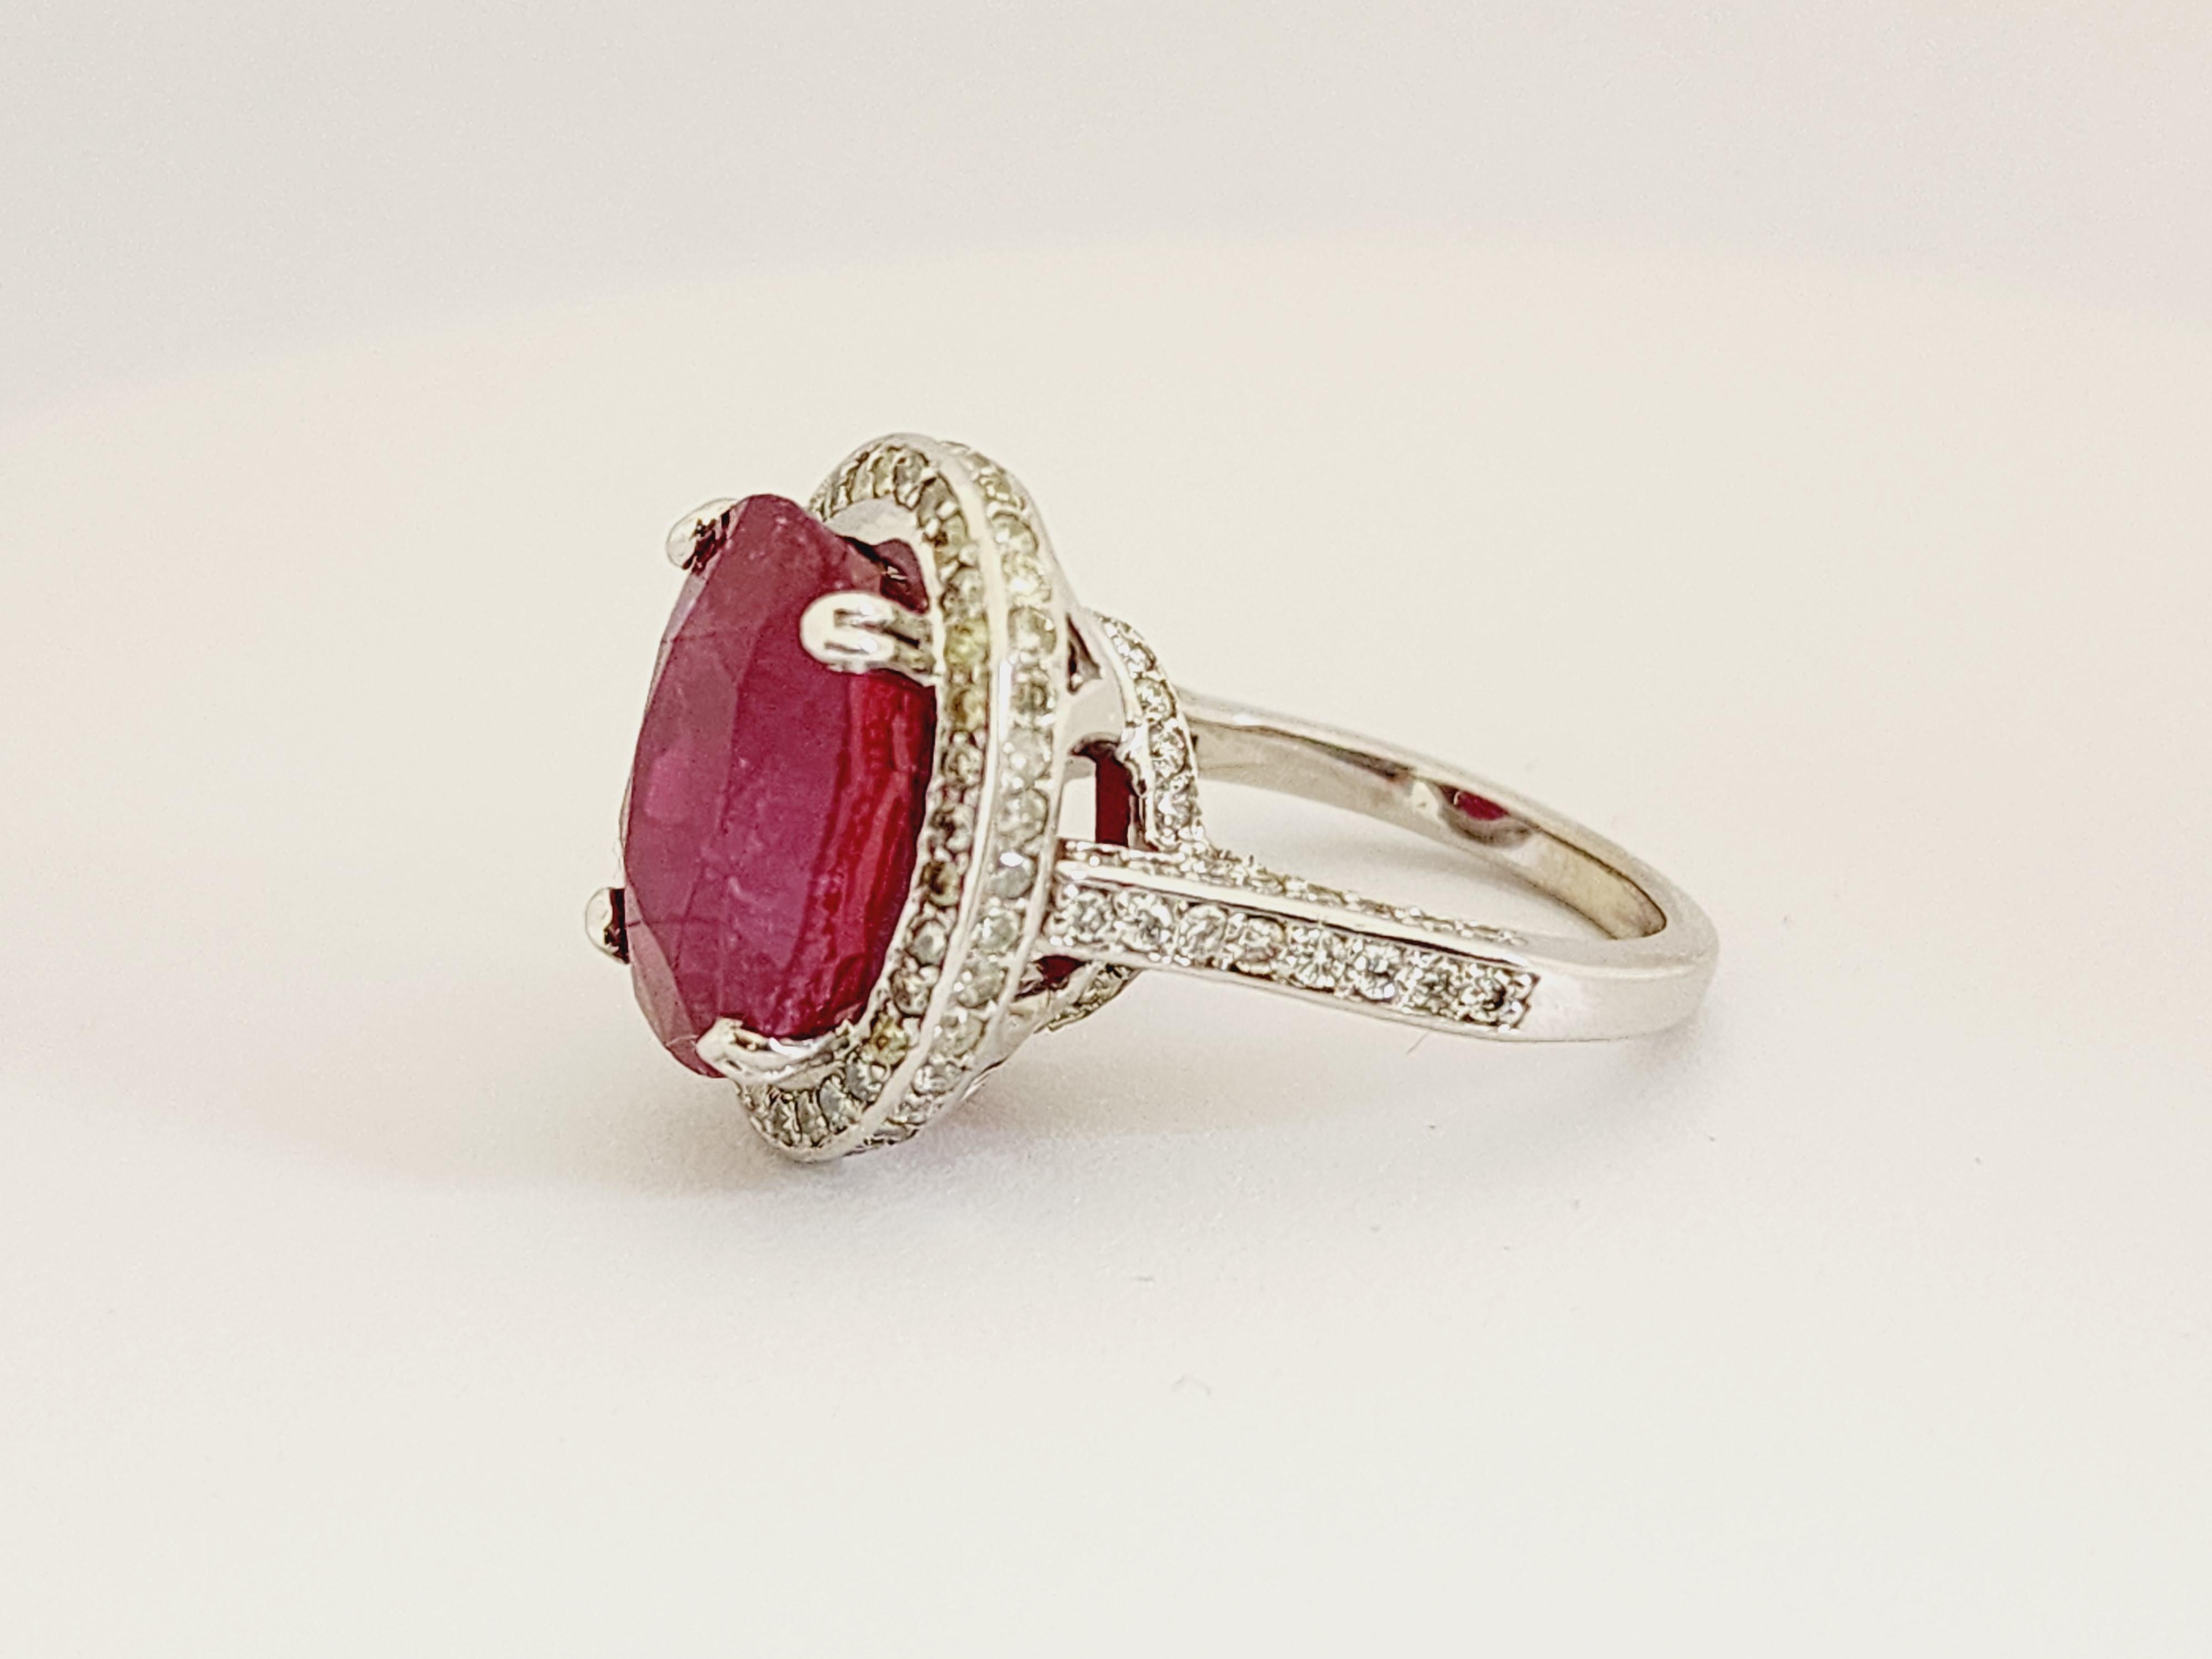 Elegant Ruby Diamond Ring 14 Karat White Gold In New Condition For Sale In Great Neck, NY